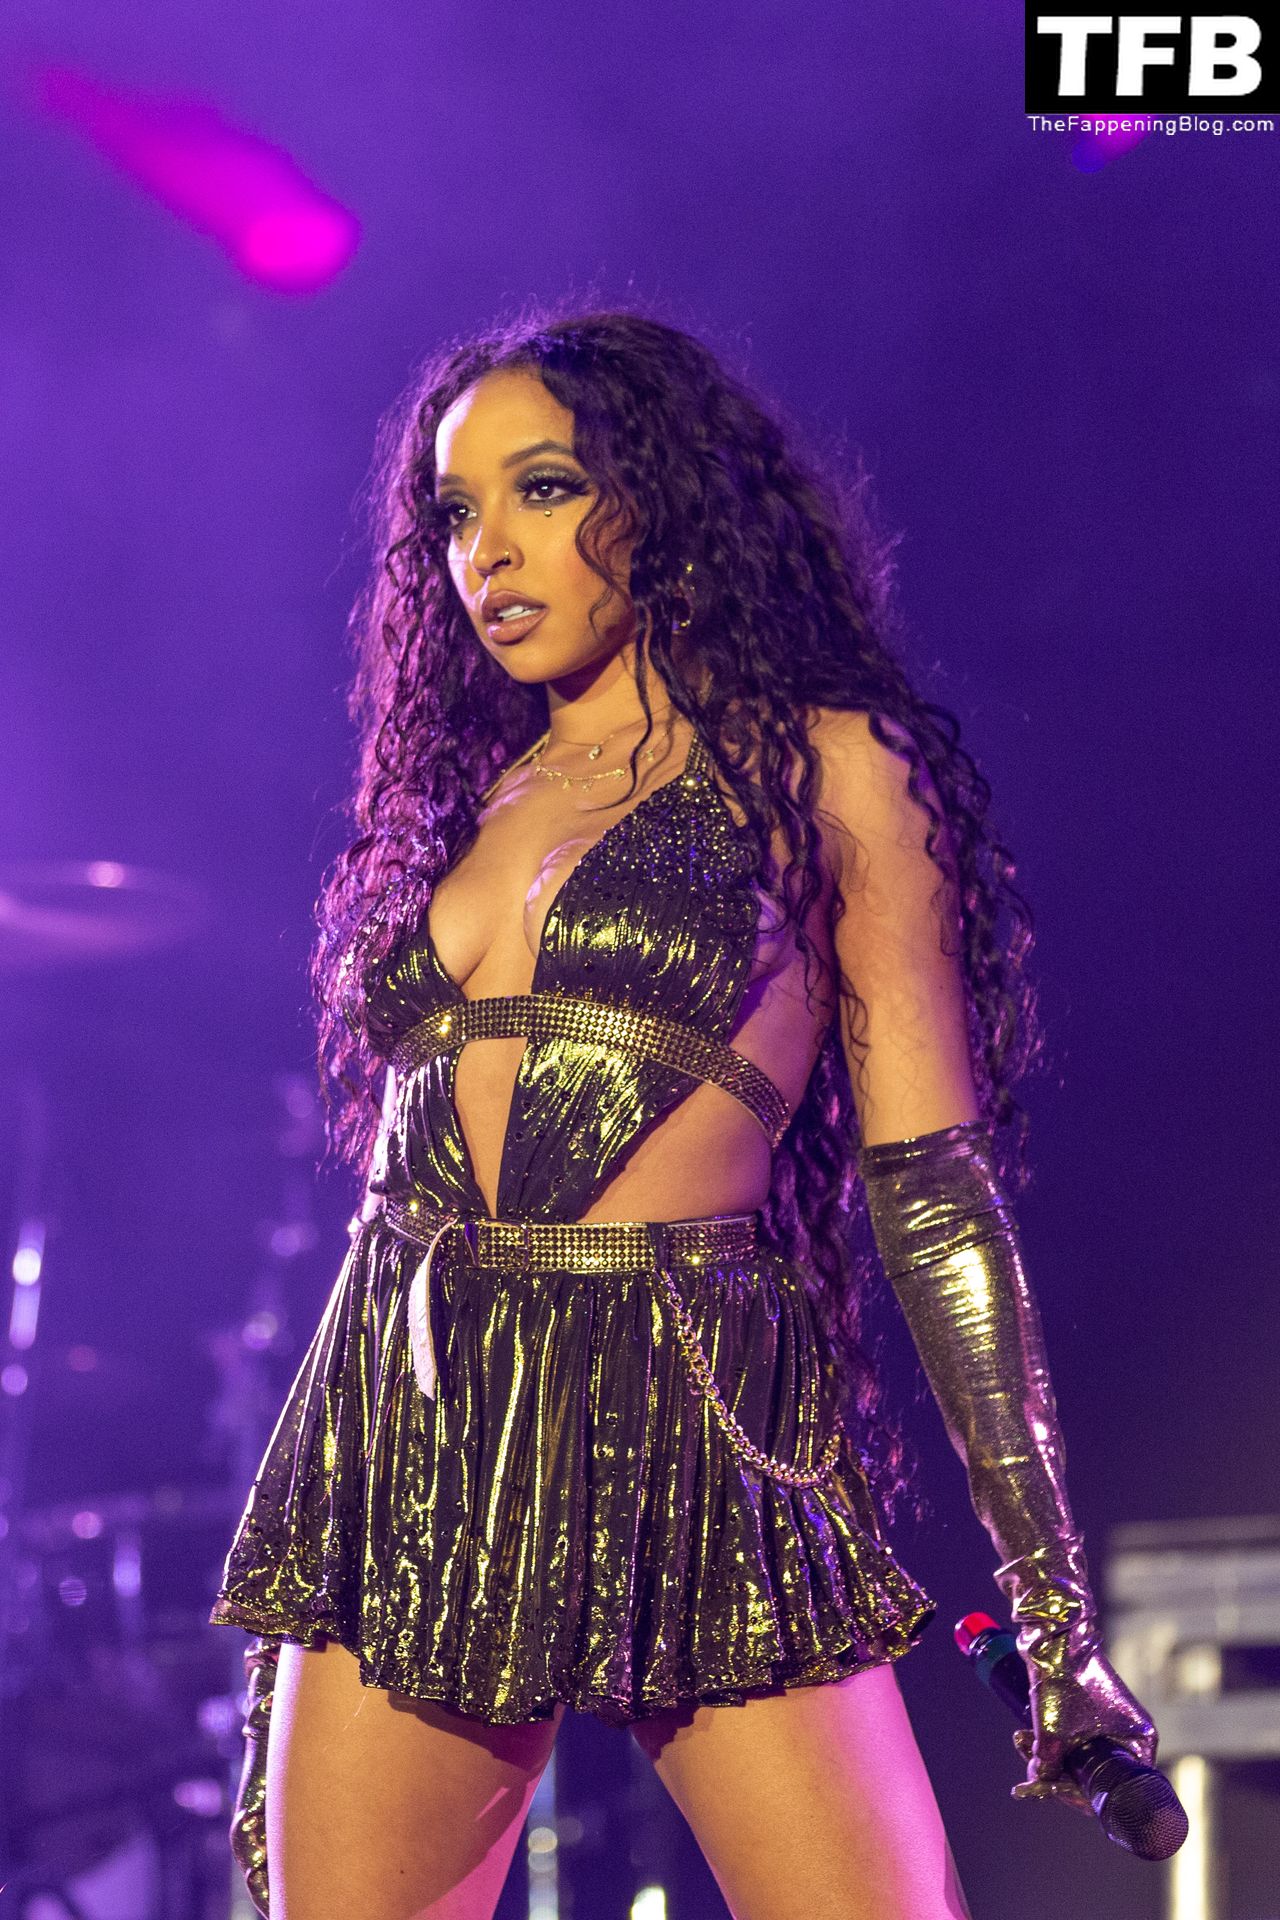 Tinashe-Sexy-The-Fappening-Blog-7.jpg